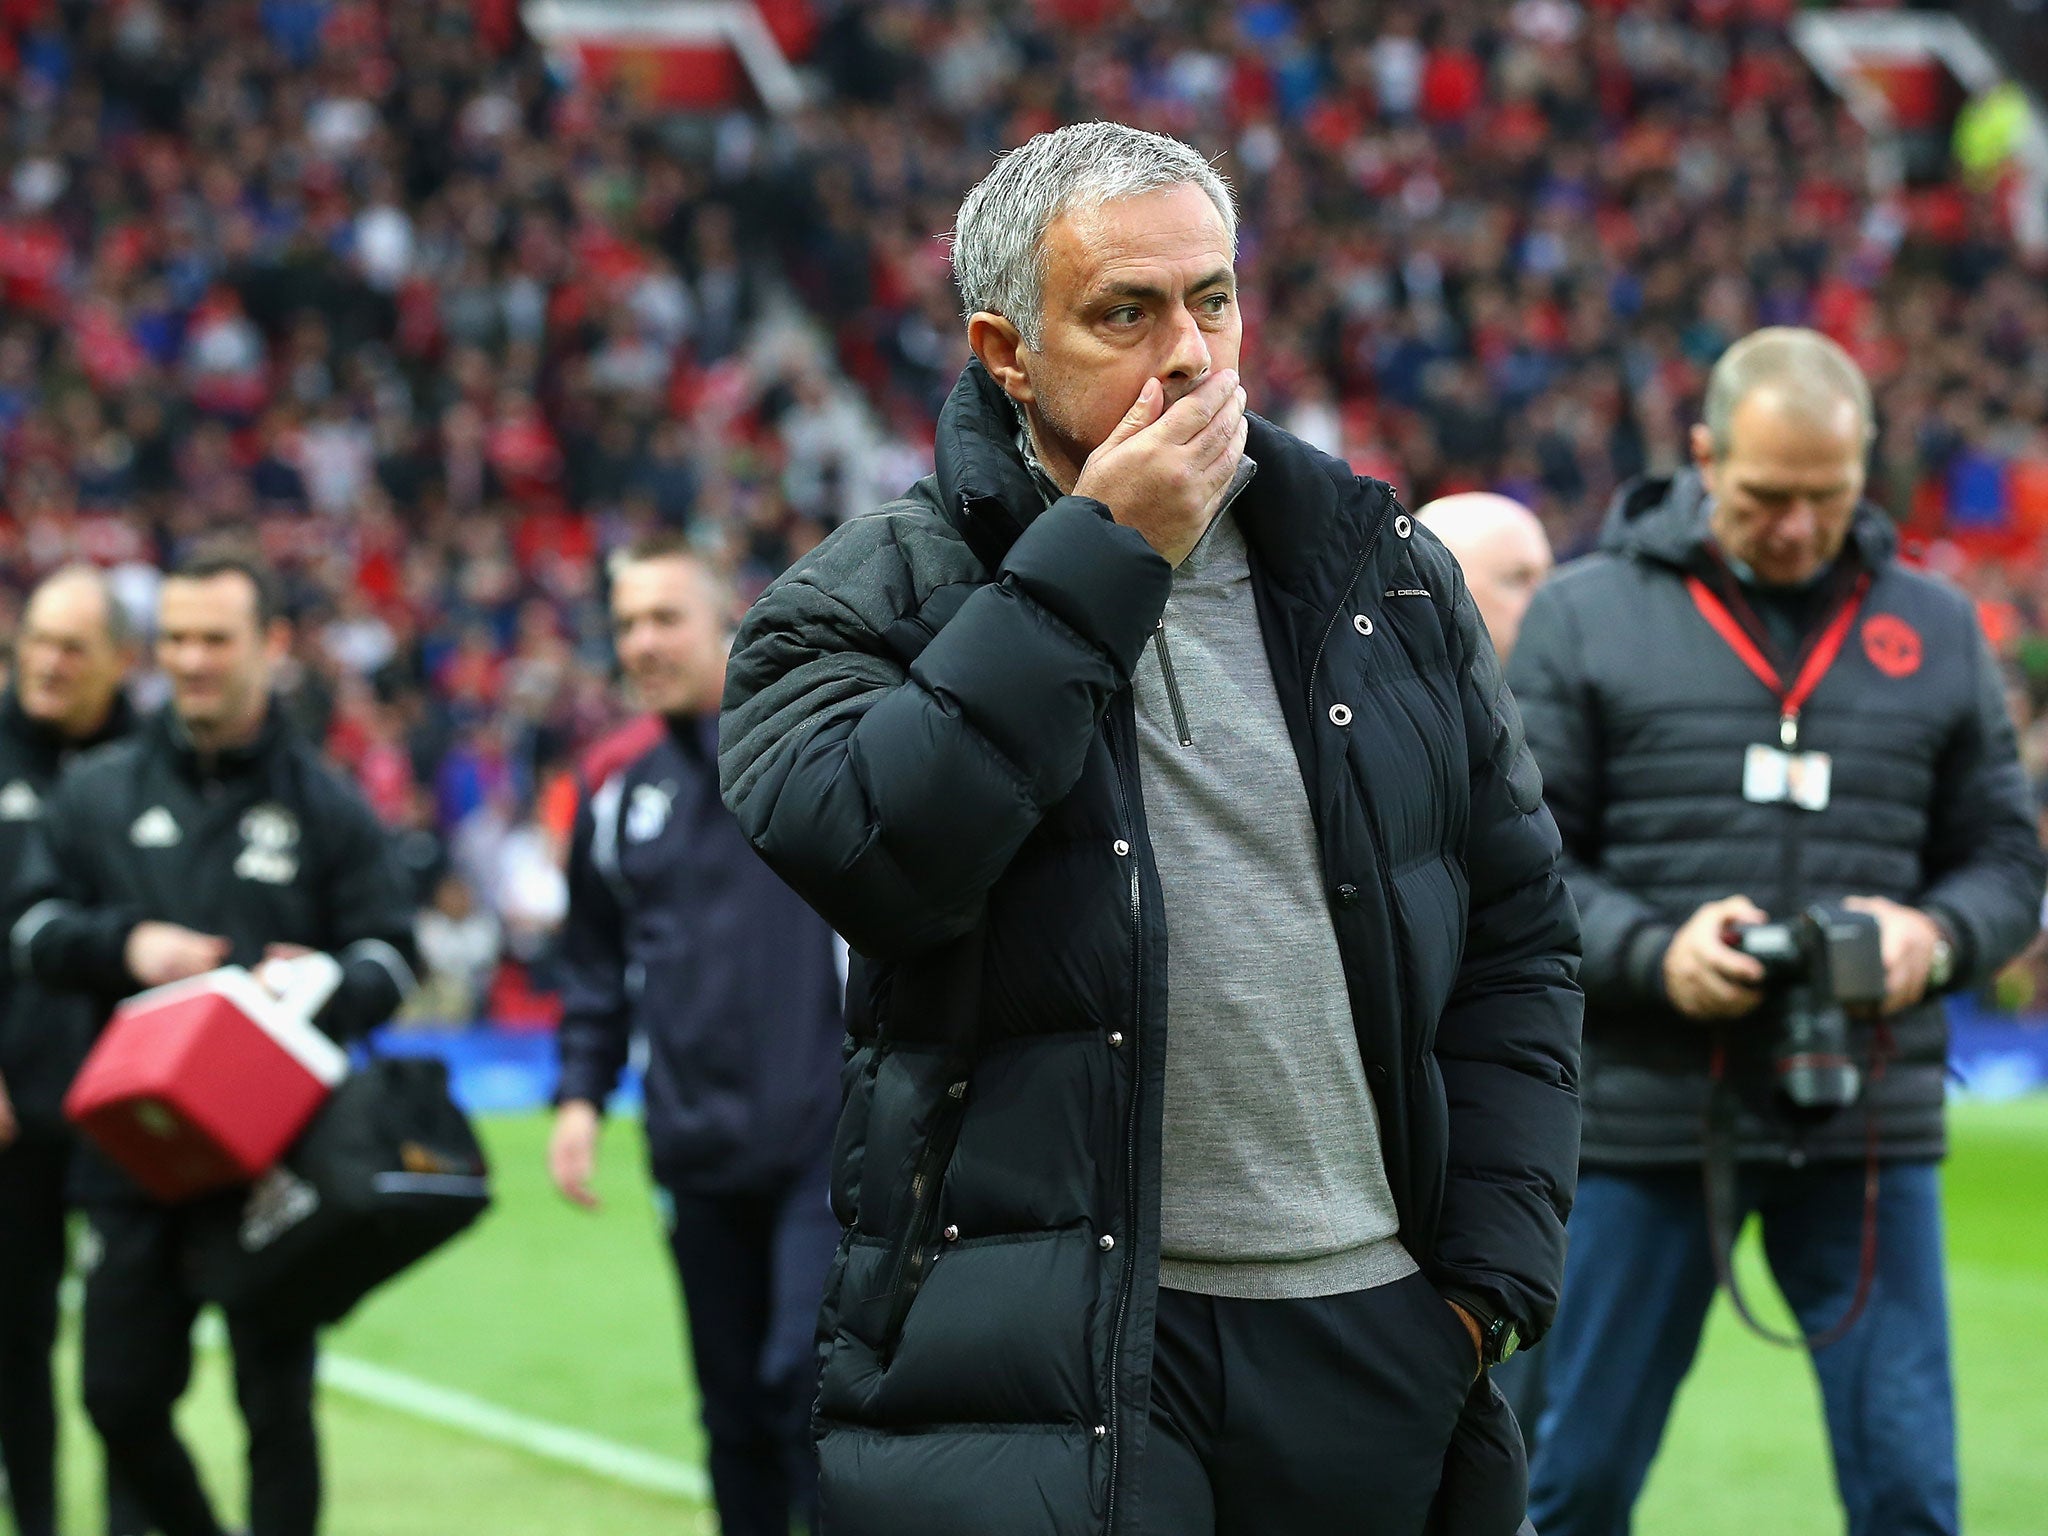 Mourinho is expected to introduce a number of changes to his United side for their clash with Arsenal on Saturday